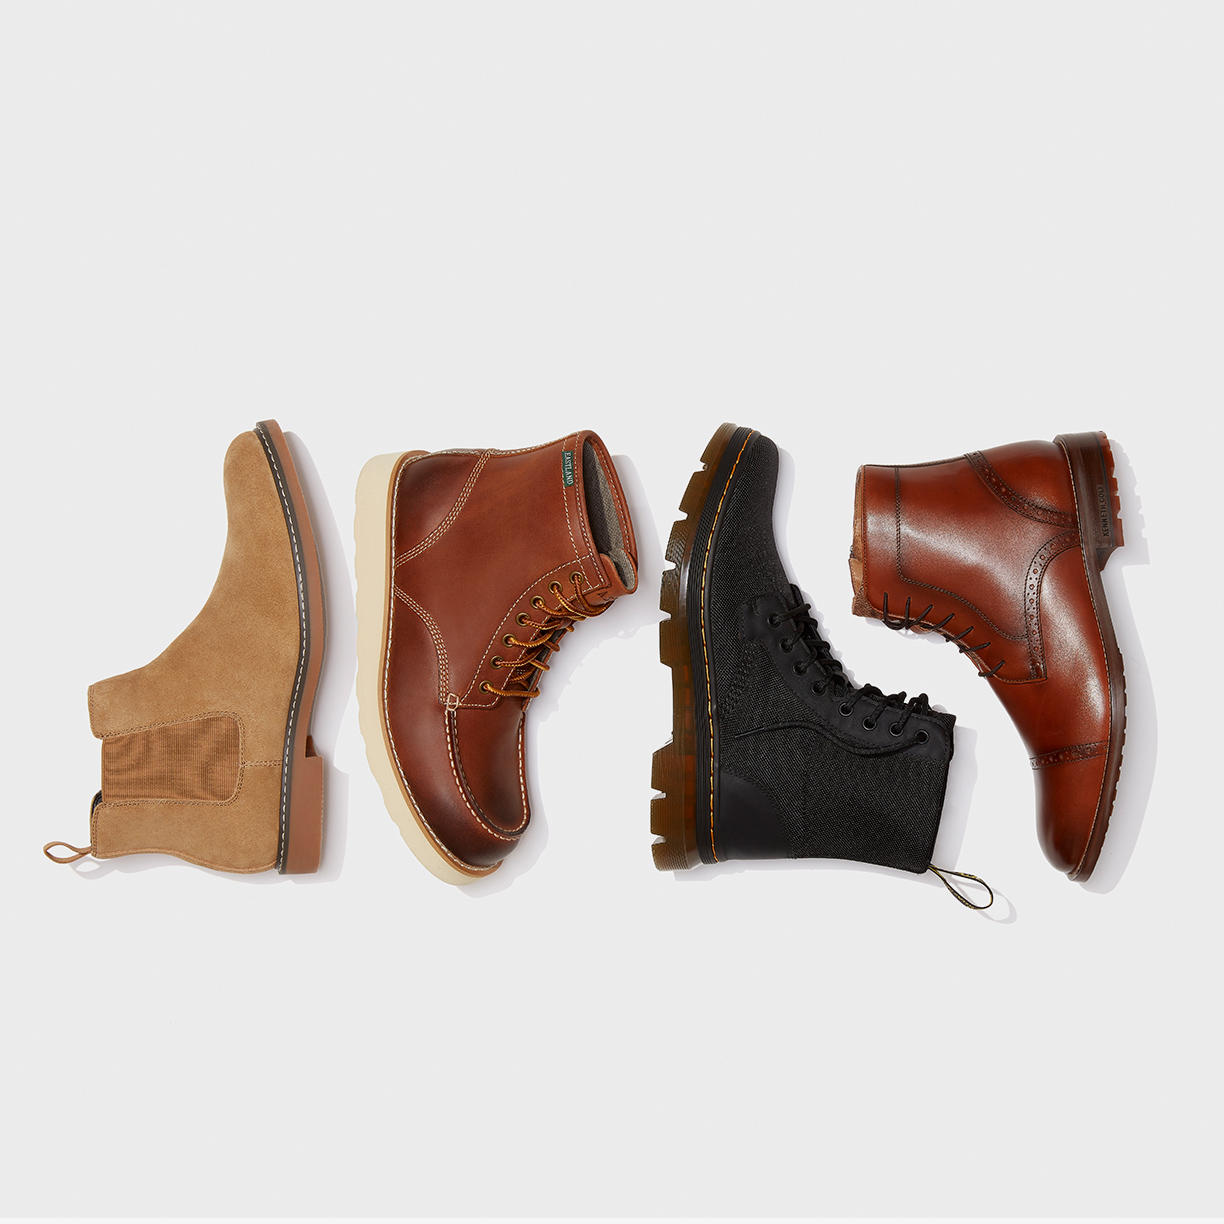 Men's Winter Boot Preview Up to 50% Off